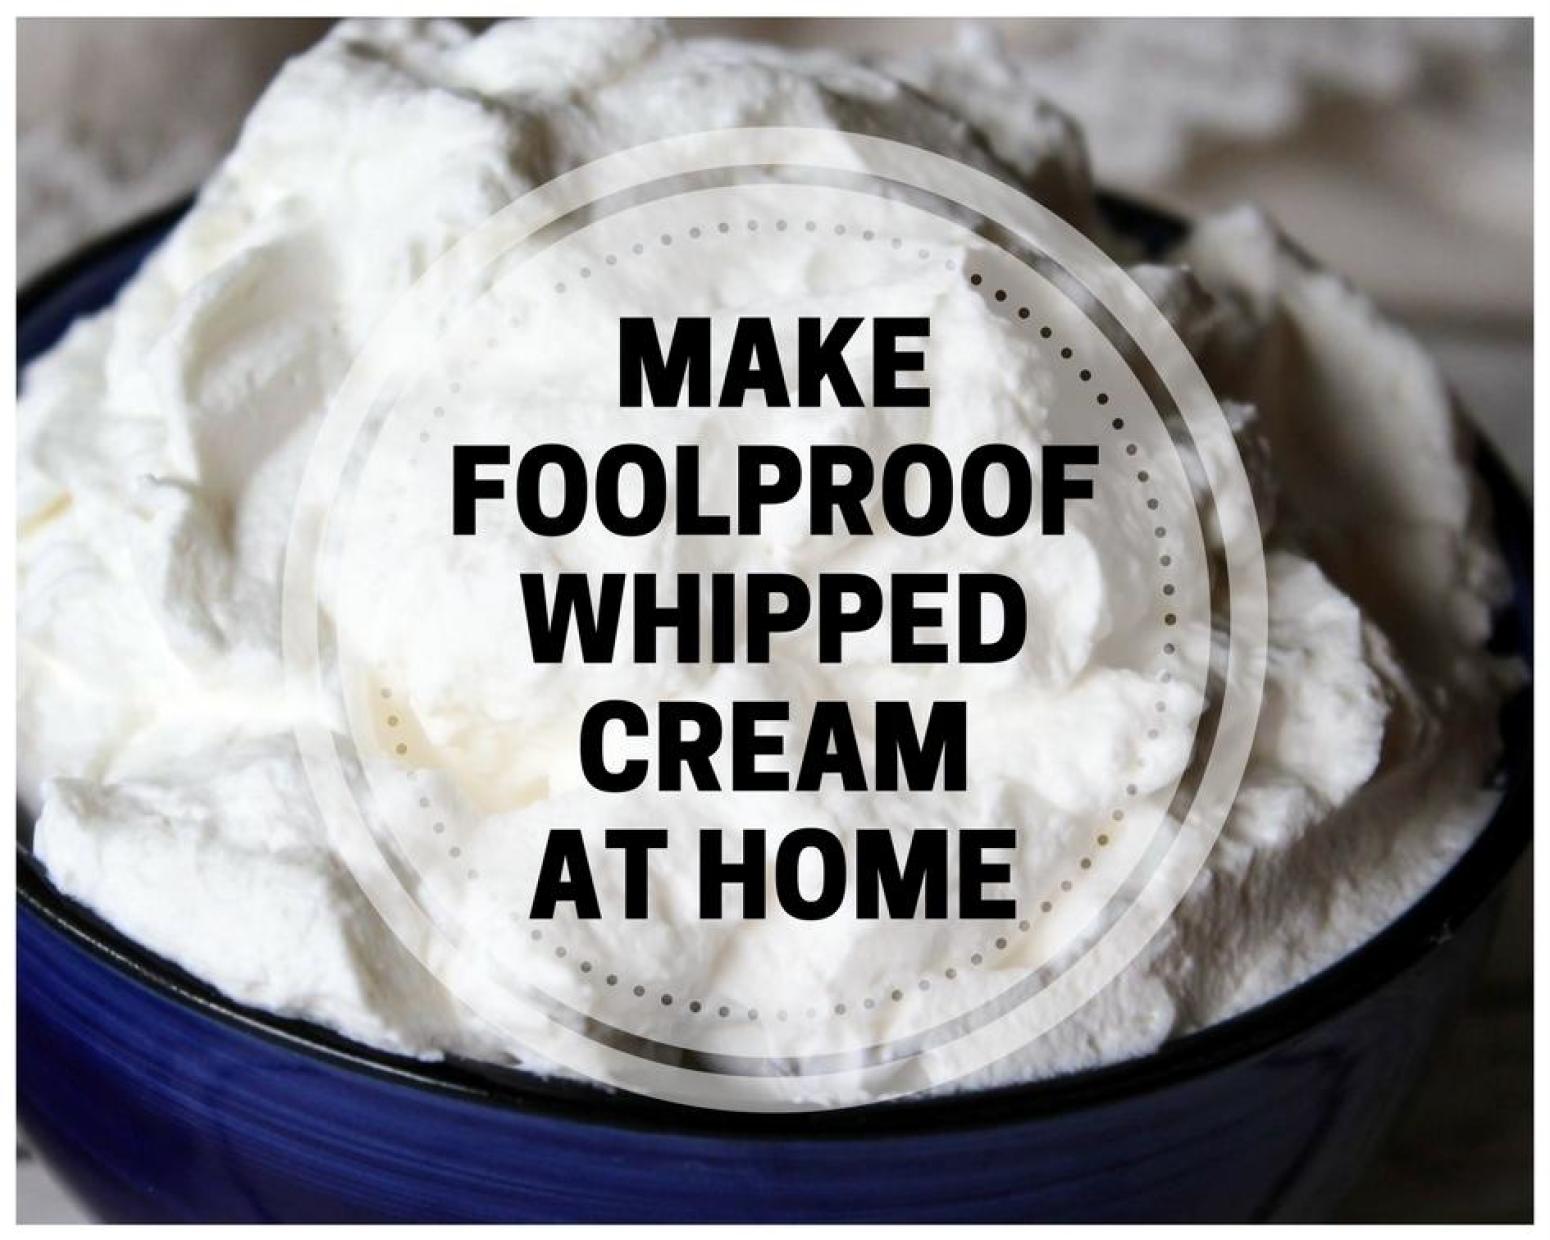 Make Foolproof Whipped Cream at Home - Just A Pinch